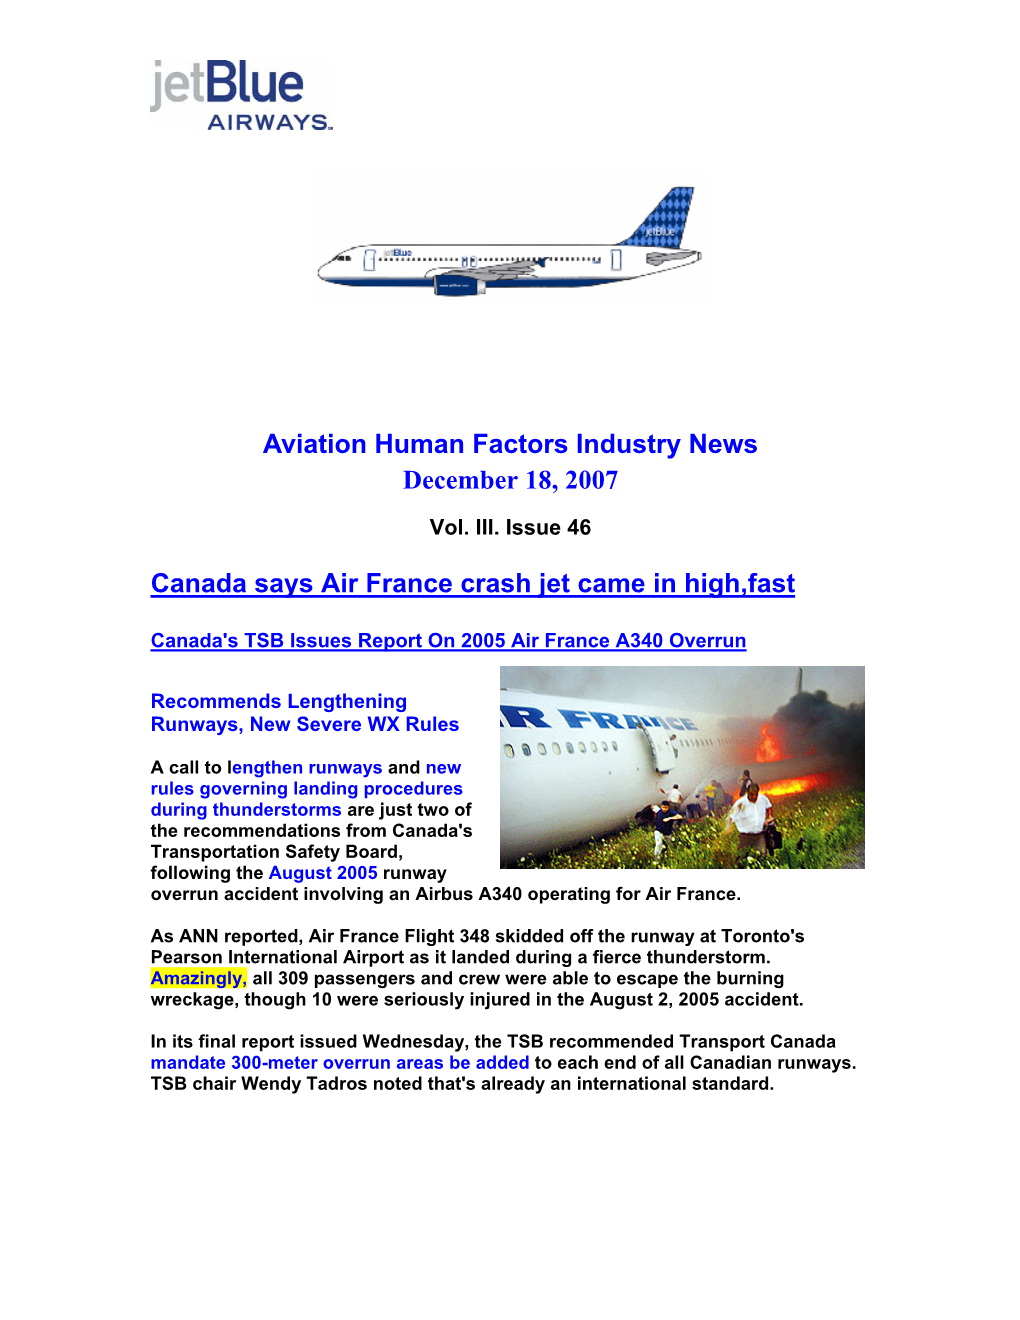 Aviation Human Factors Industry News December 18, 2007 Canada Says Air France Crash Jet Came in High,Fast